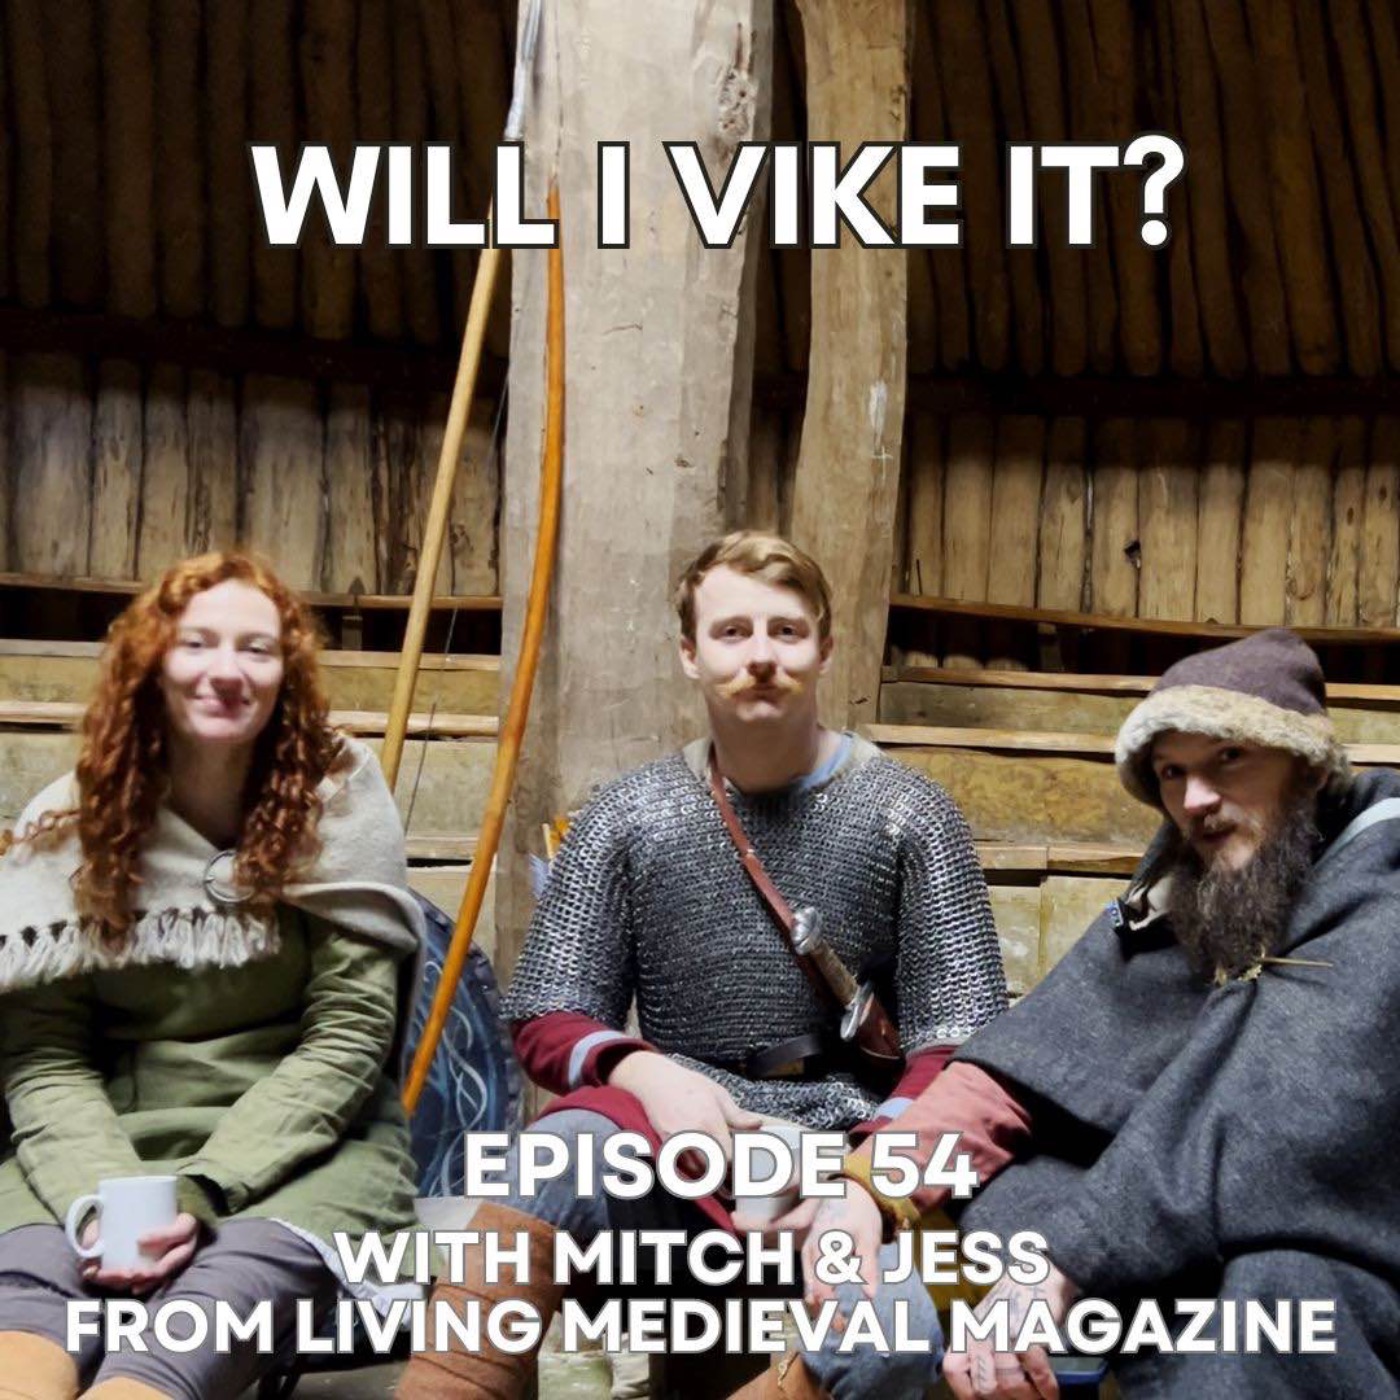 Mitch & Jess from Living Medieval magazine